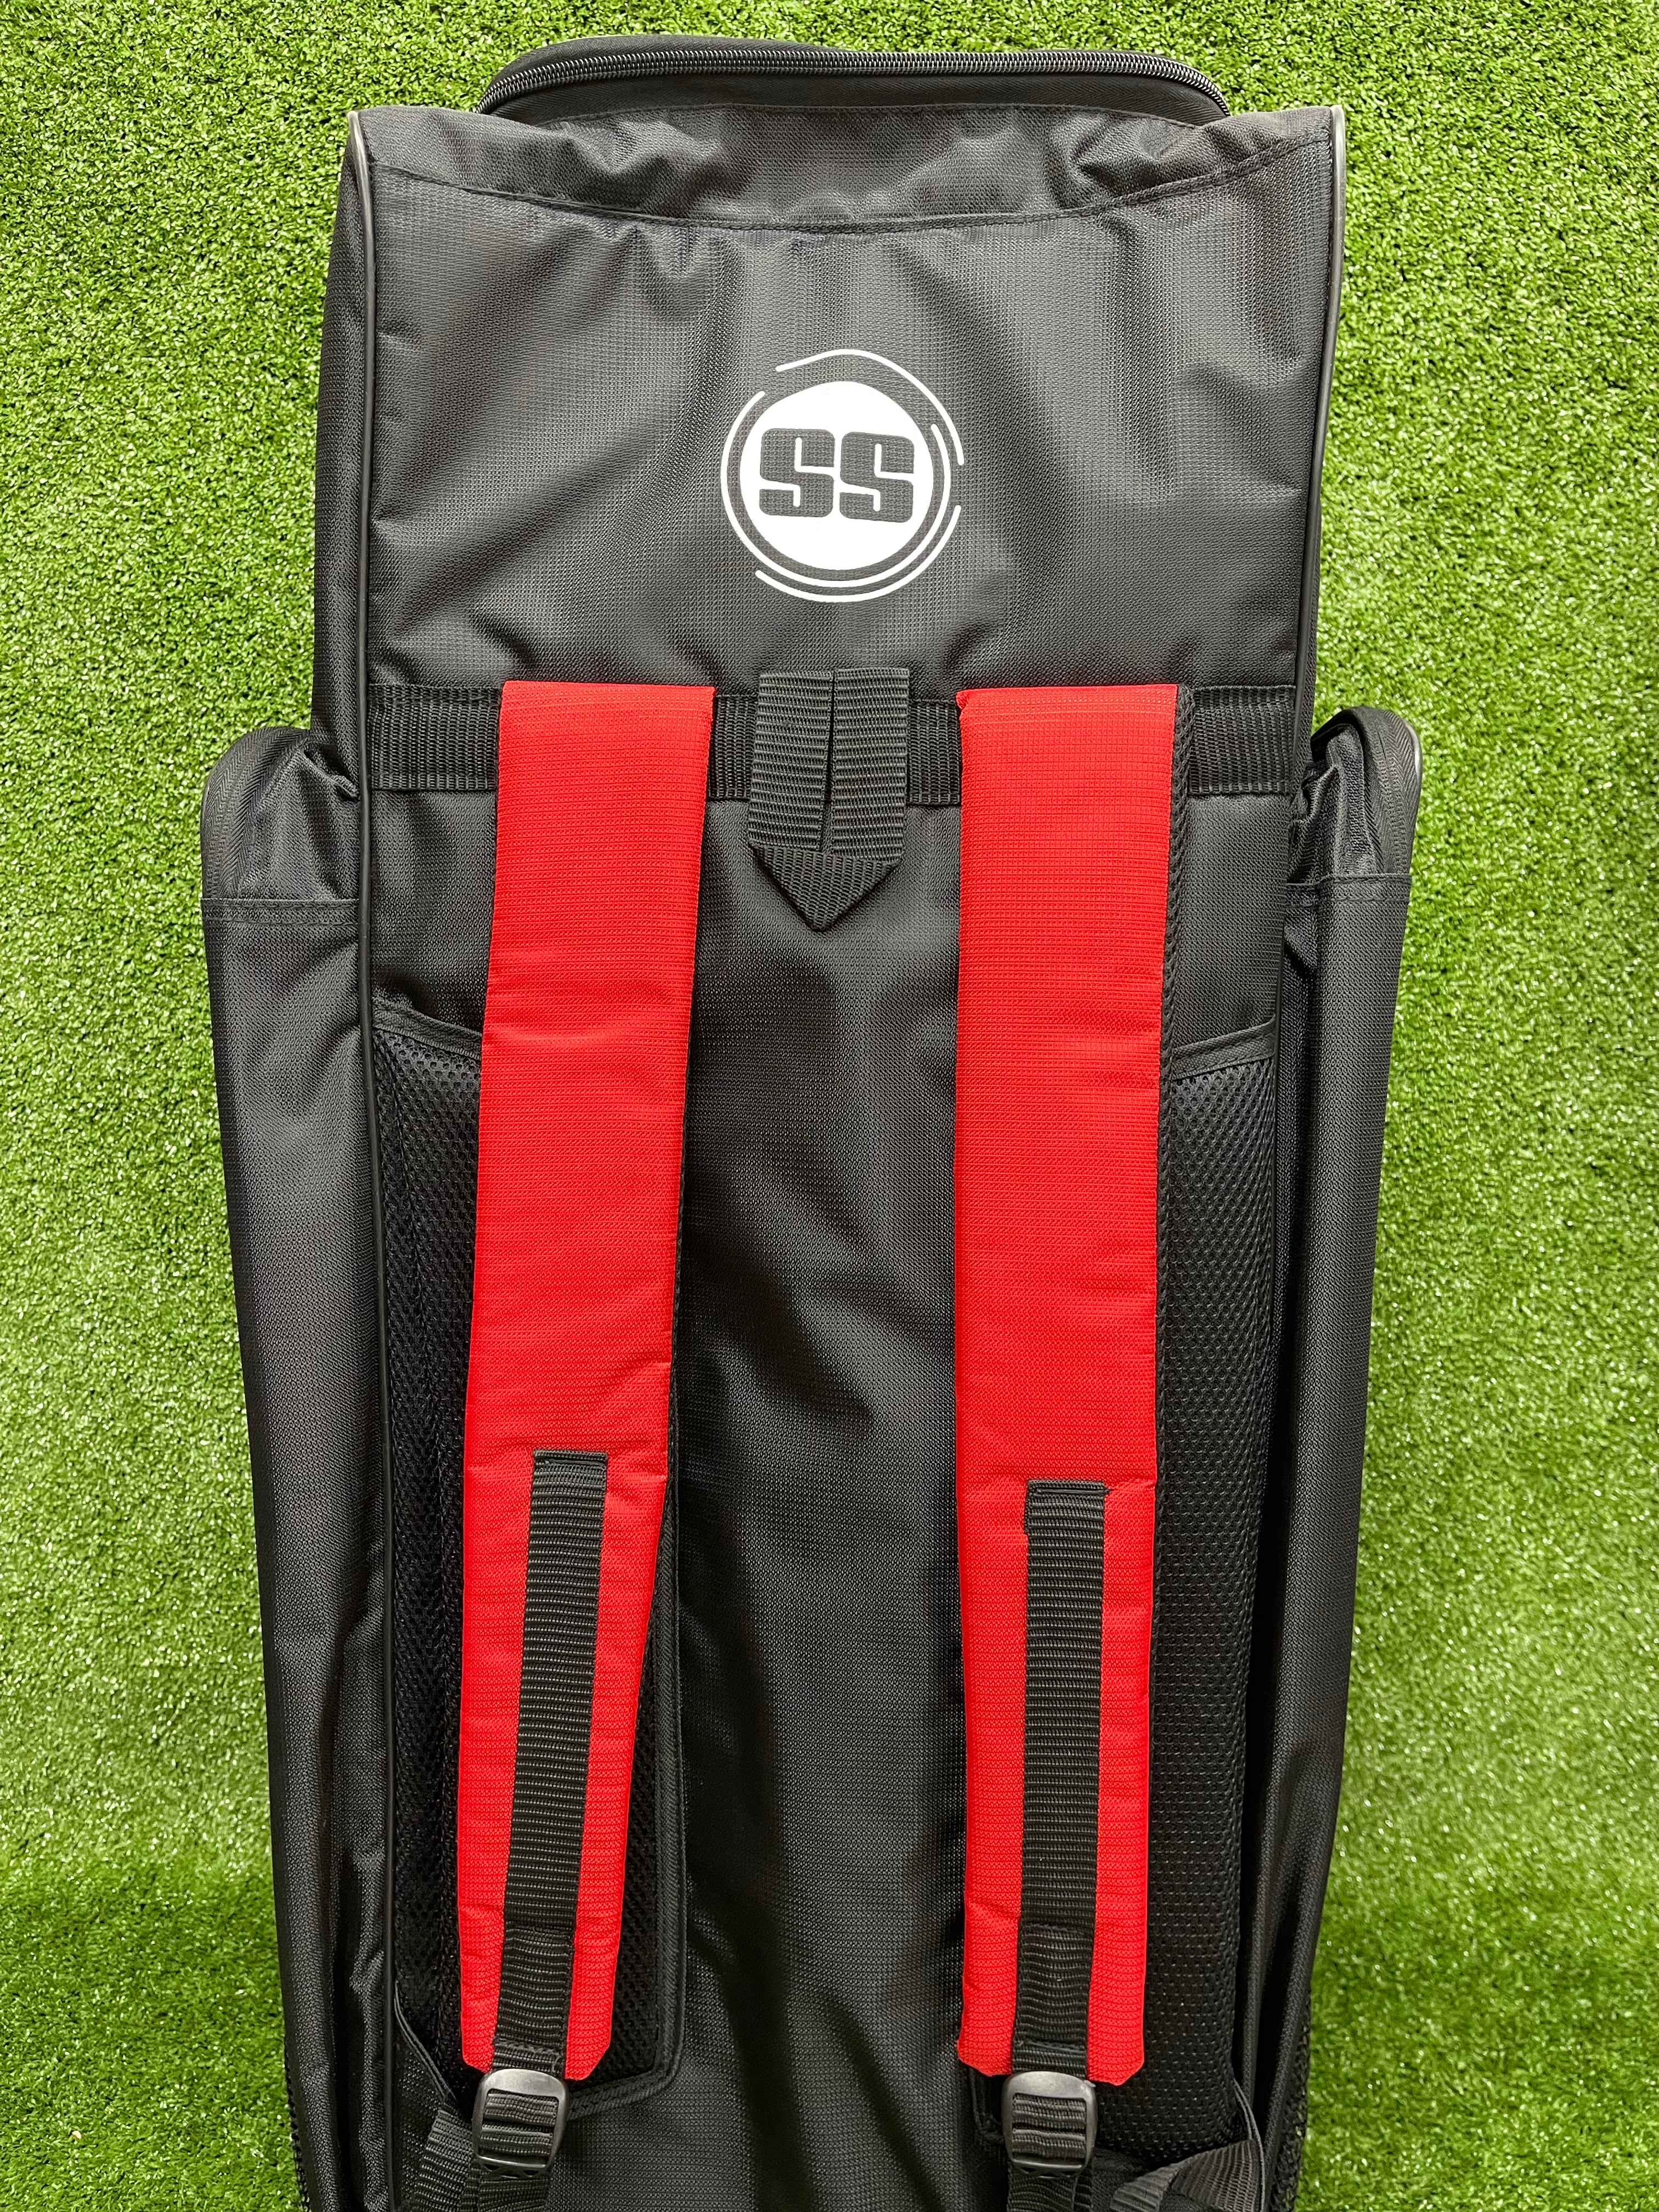 SS World Cup Duffle Cricket Kit Bag (Black & Red)